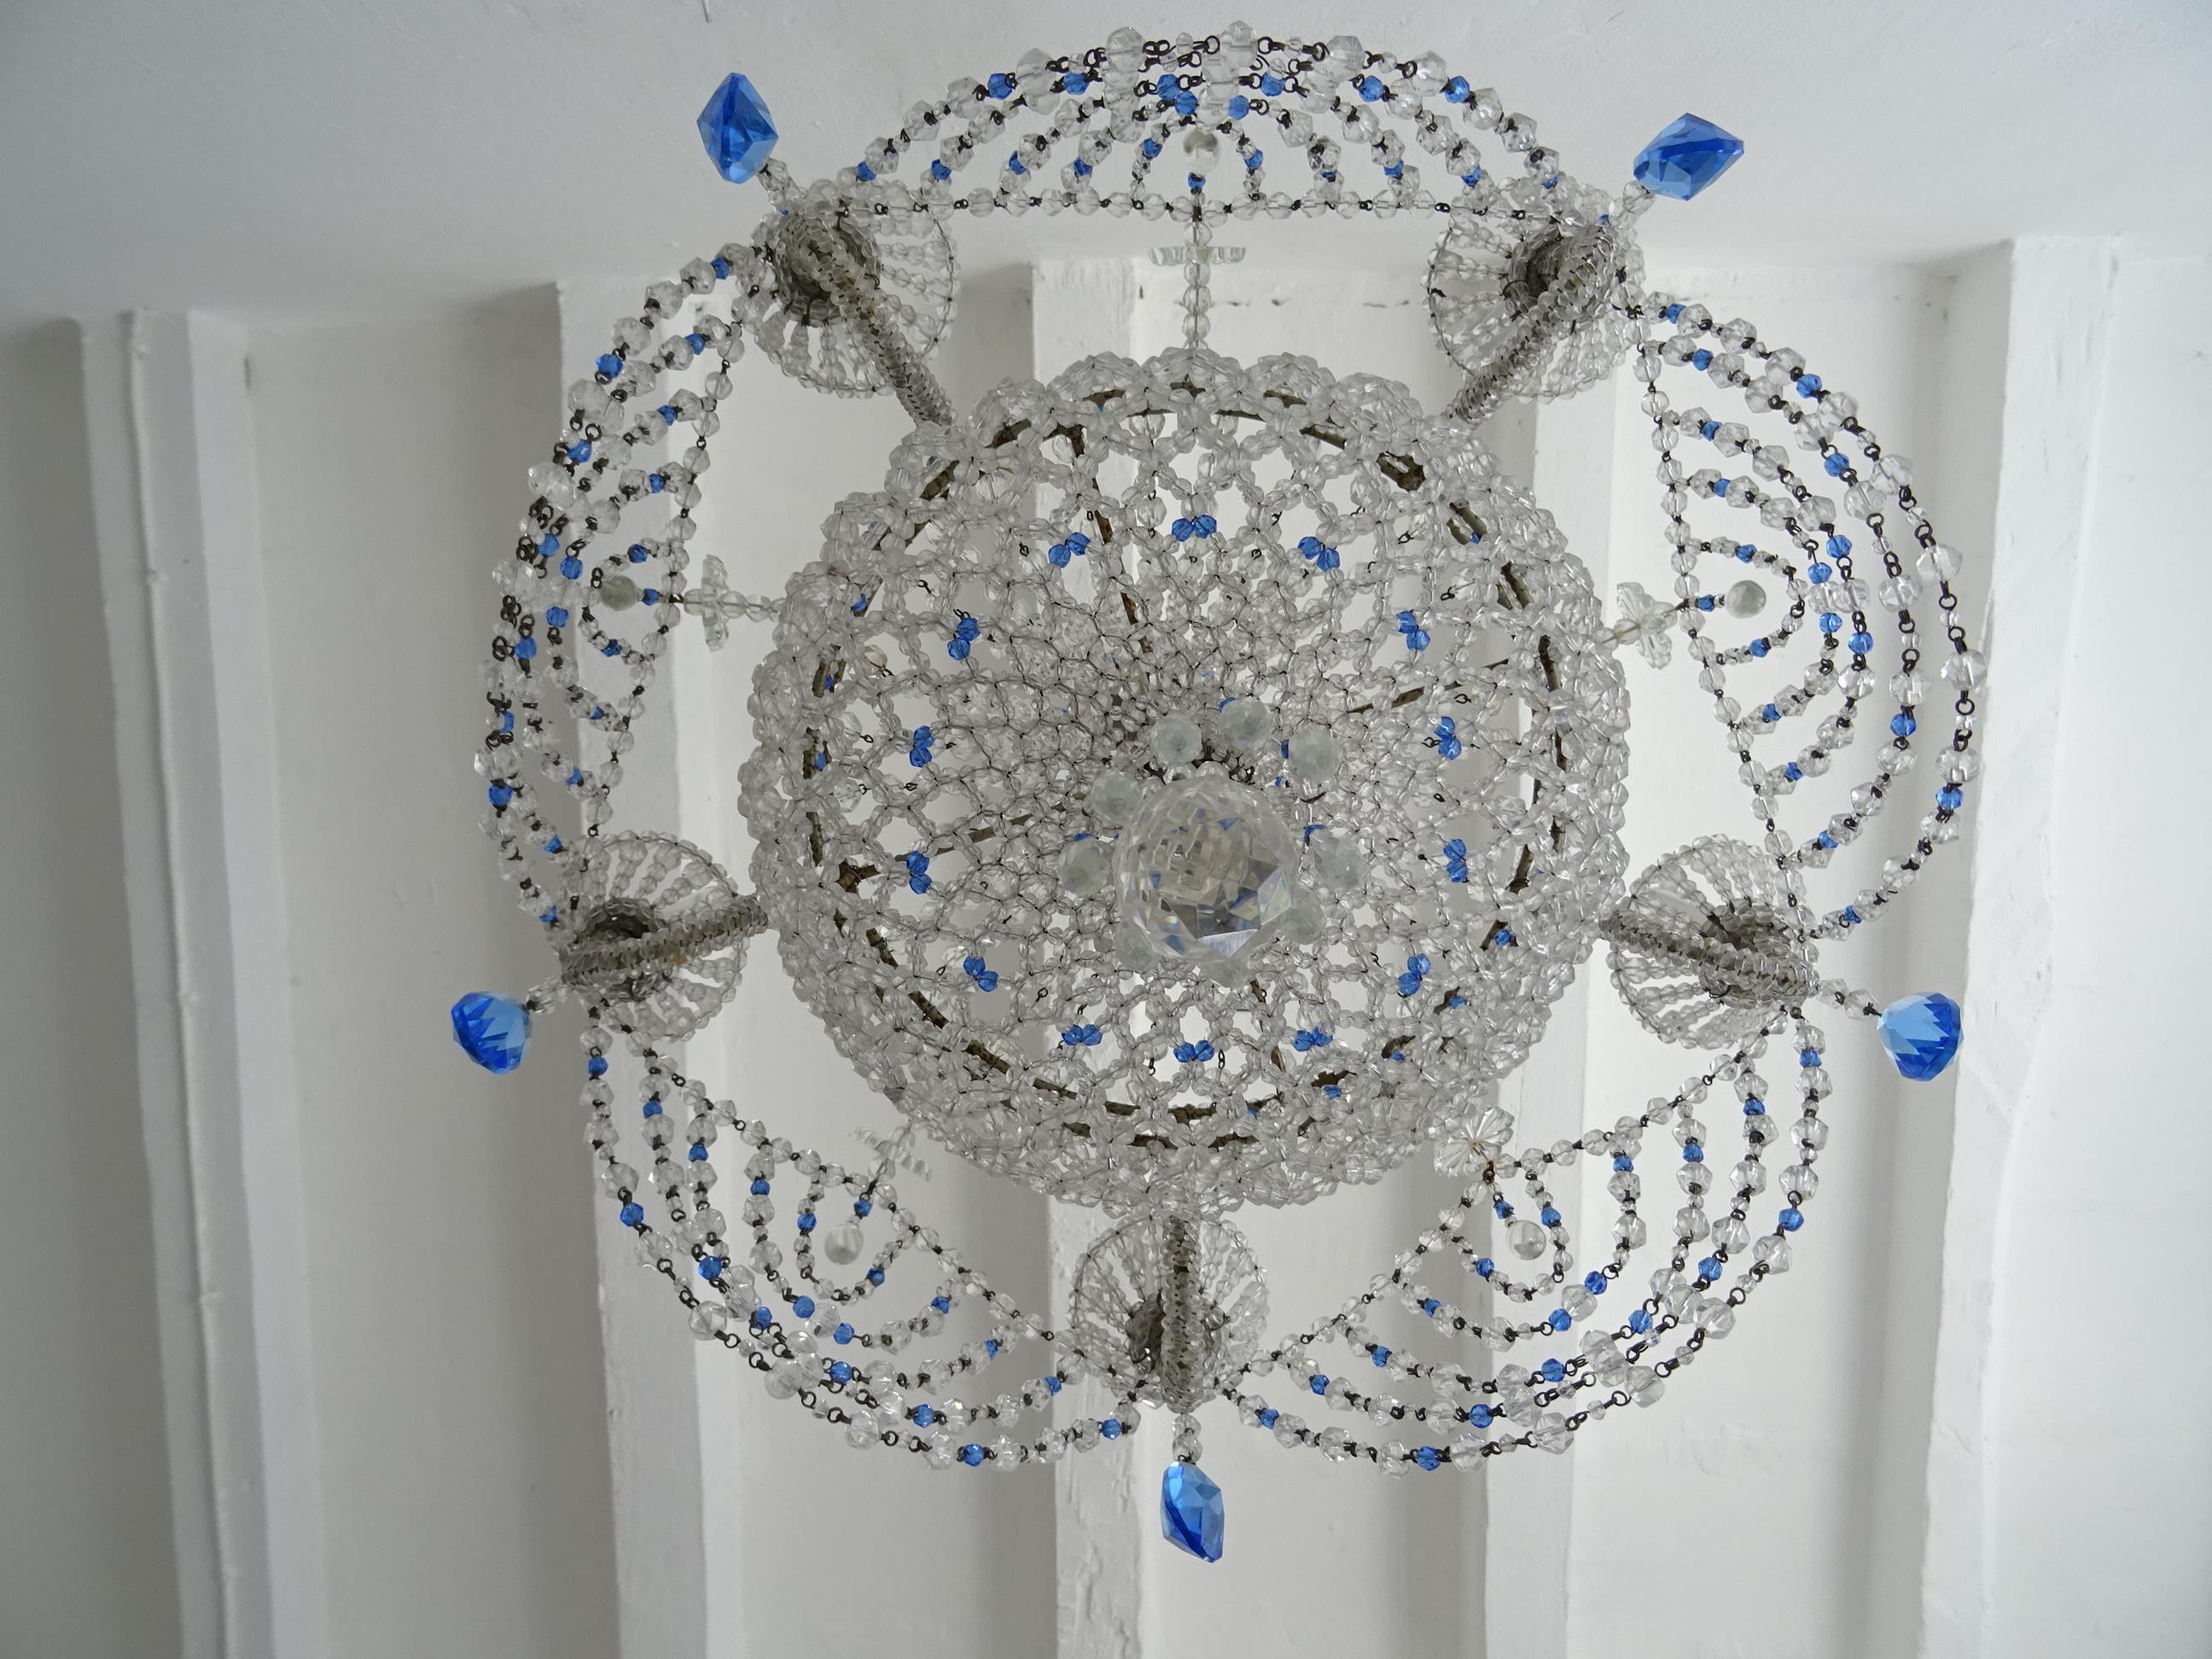 Housing 5 lights in beaded cups. This elegant chandelier is completely beaded with a beaded lace bottom. Adorning rare cobalt blue crystal prisms and cobalt blue beads throughout. Swags of crystal clear beads and cobalt as well. Spears on bottom